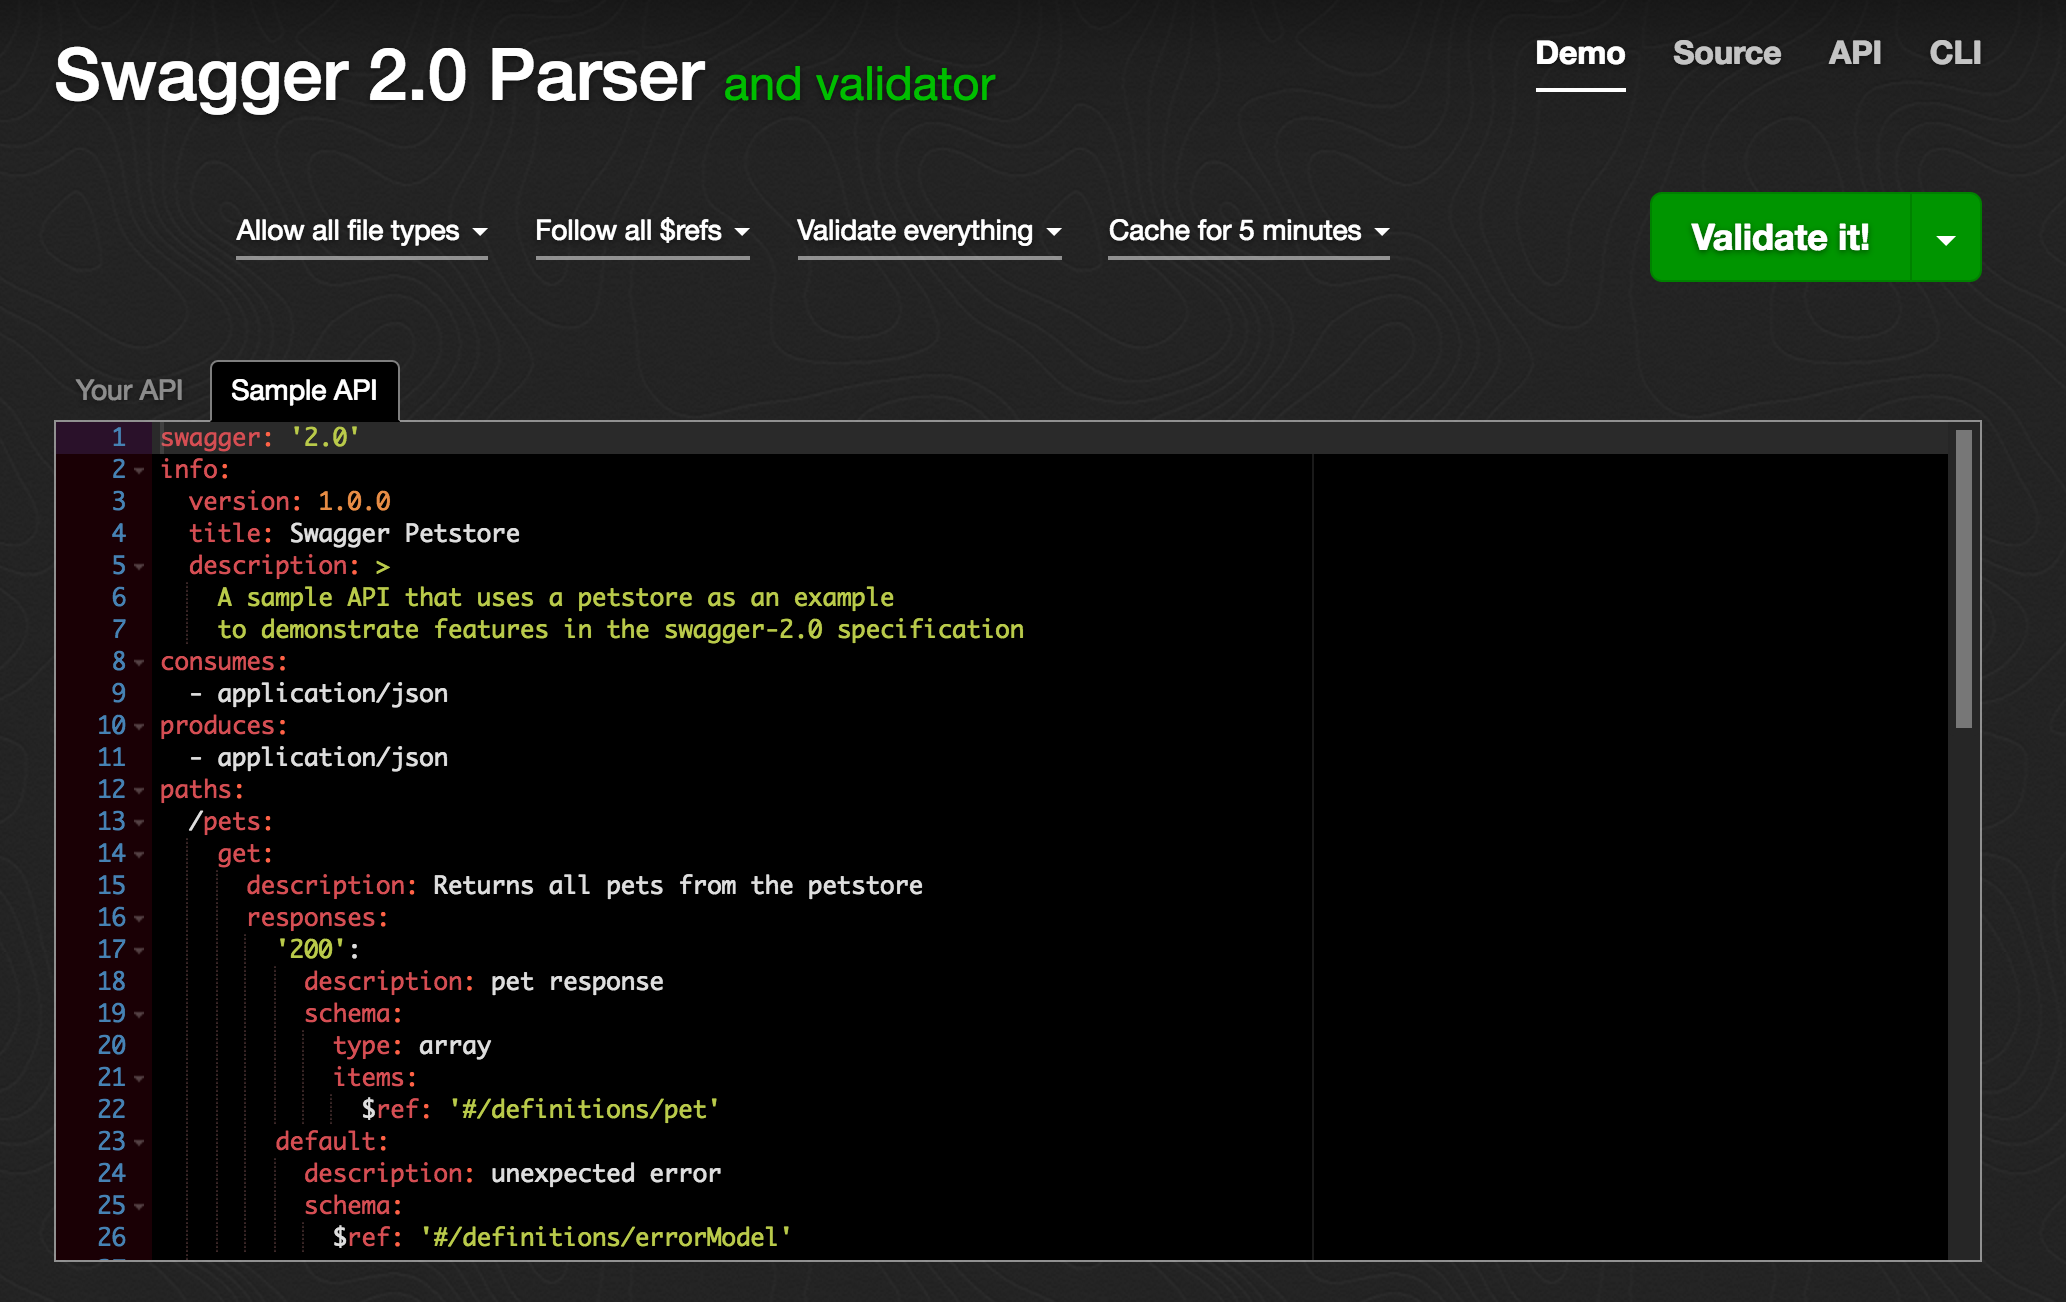 swagger-parser-001